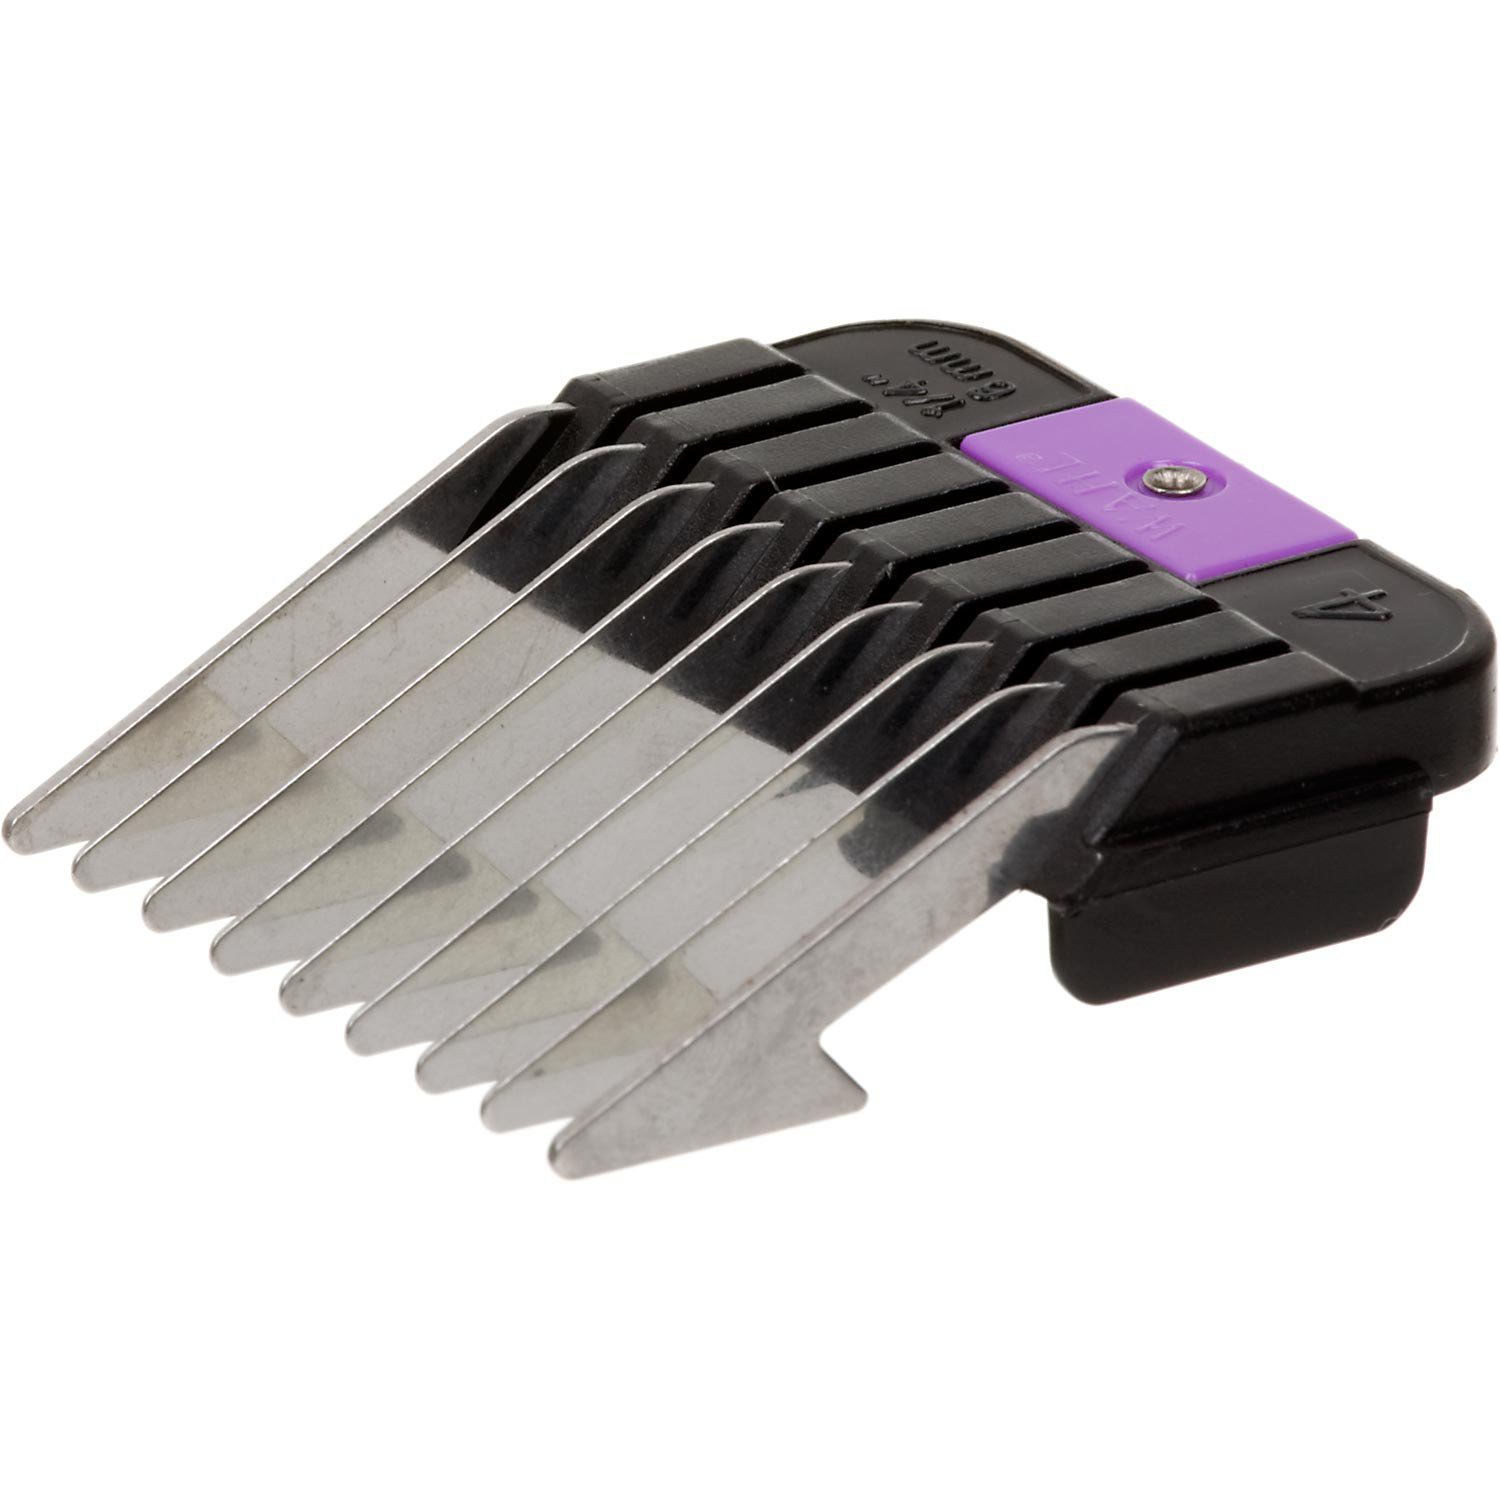 Wahl Stainless Steel Attachment Guide Combs #4 | Petco Wahl Stainless Steel Attachment Guide Combs